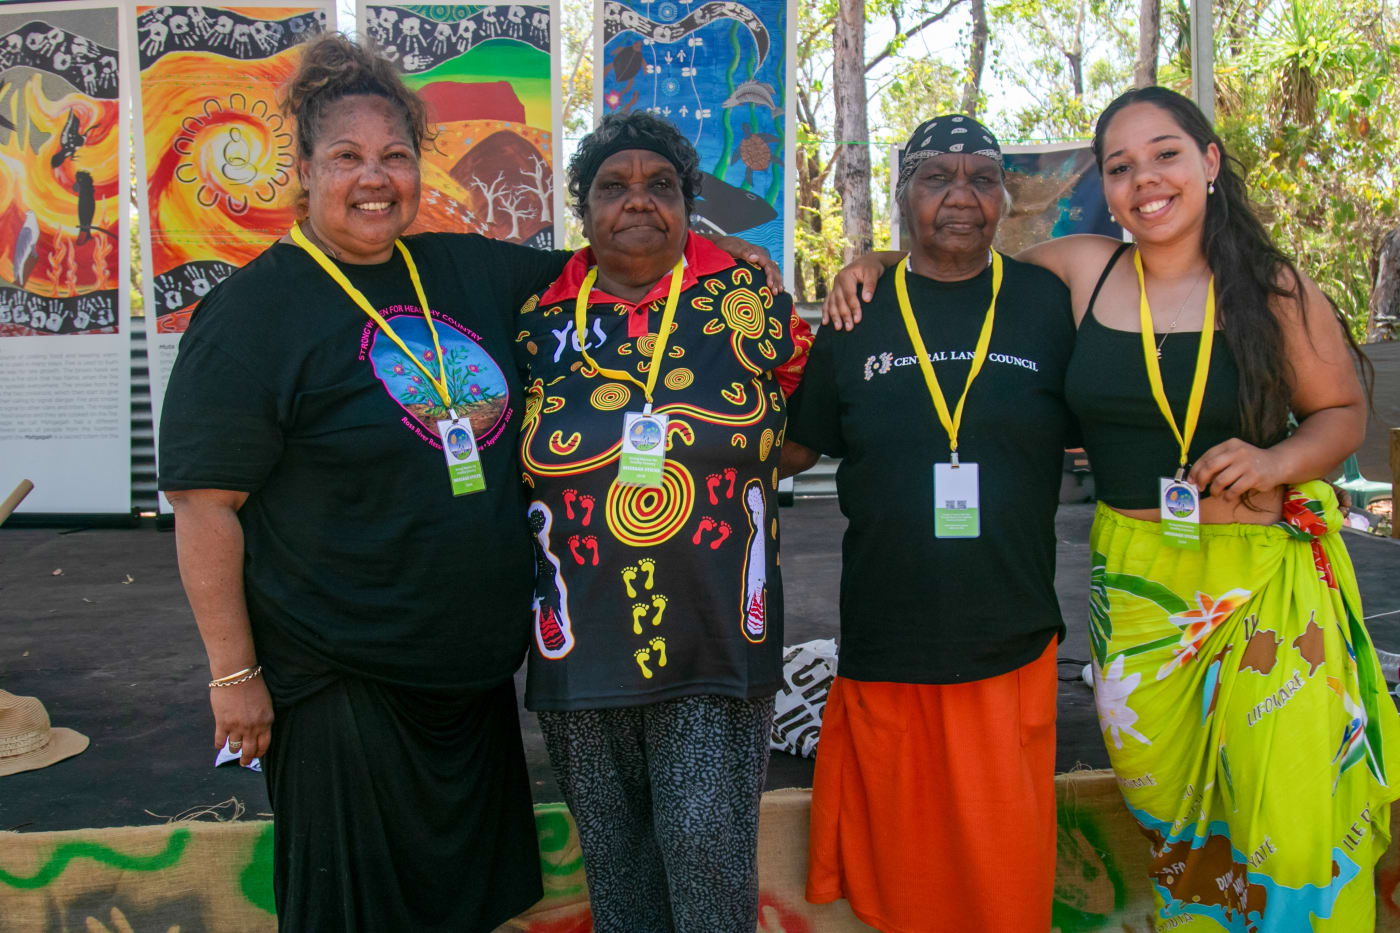 (Pictured L-R) Arrernte woman from Mparntwe (Alice Springs) and Central Land Council member Jody Kopp, Amelia Turner (Armani’s Grandmother) Mia Mulladad (Armani’s Grandmother) NT Youth Round Table member and young Arrernte leader  Armani Francois (Jody’s daughter).